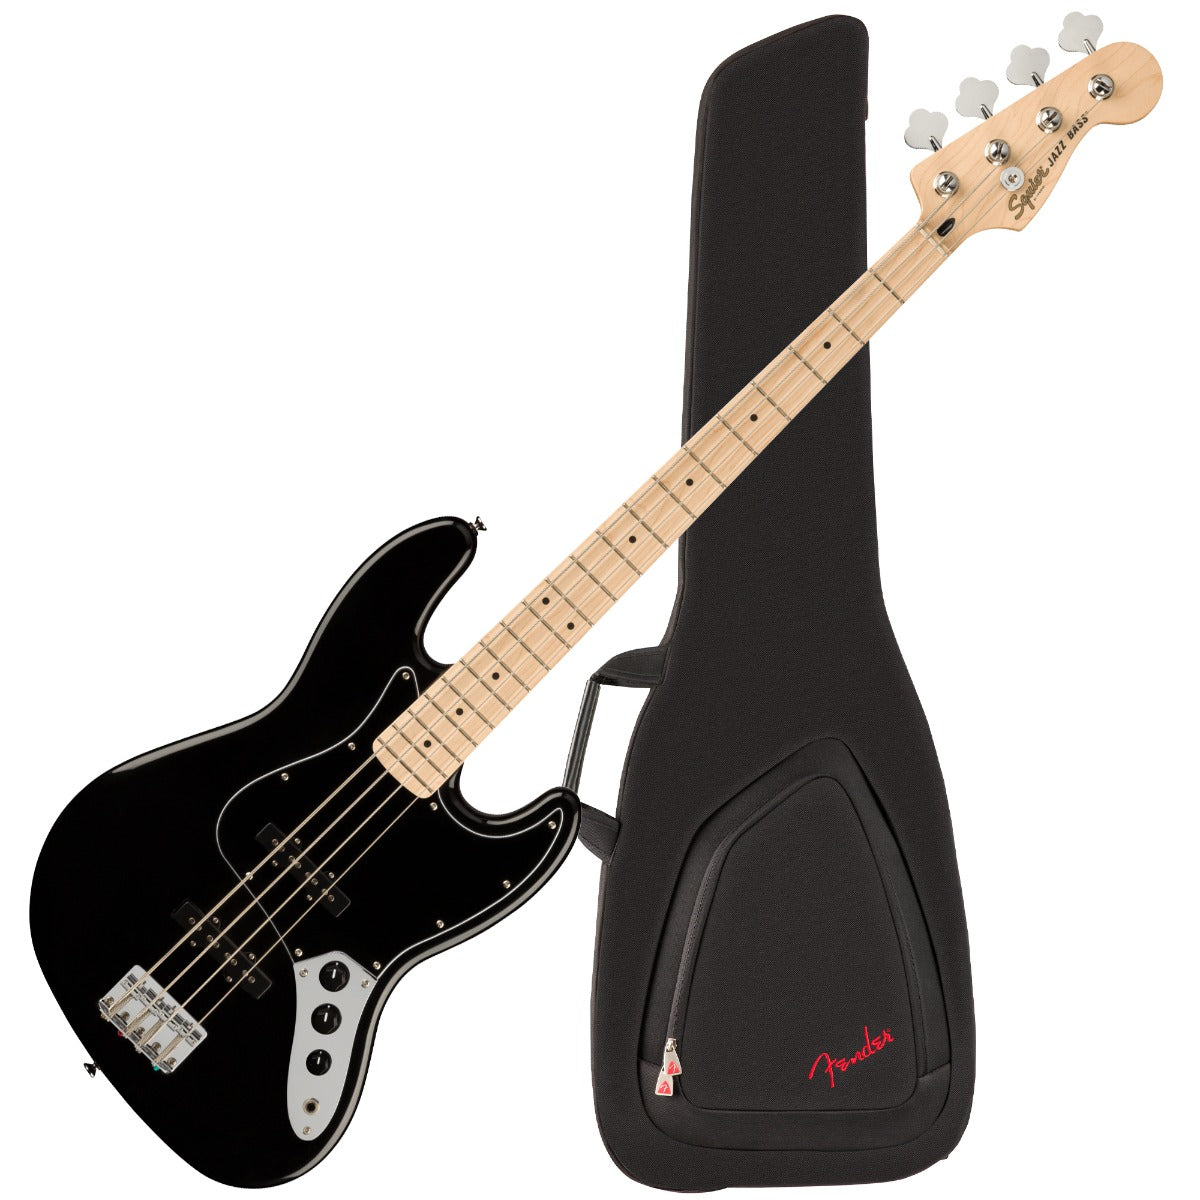 Bundle collage of components in the Squier Affinity Jazz Bass - Maple, Black PERFORMER PAK bundle